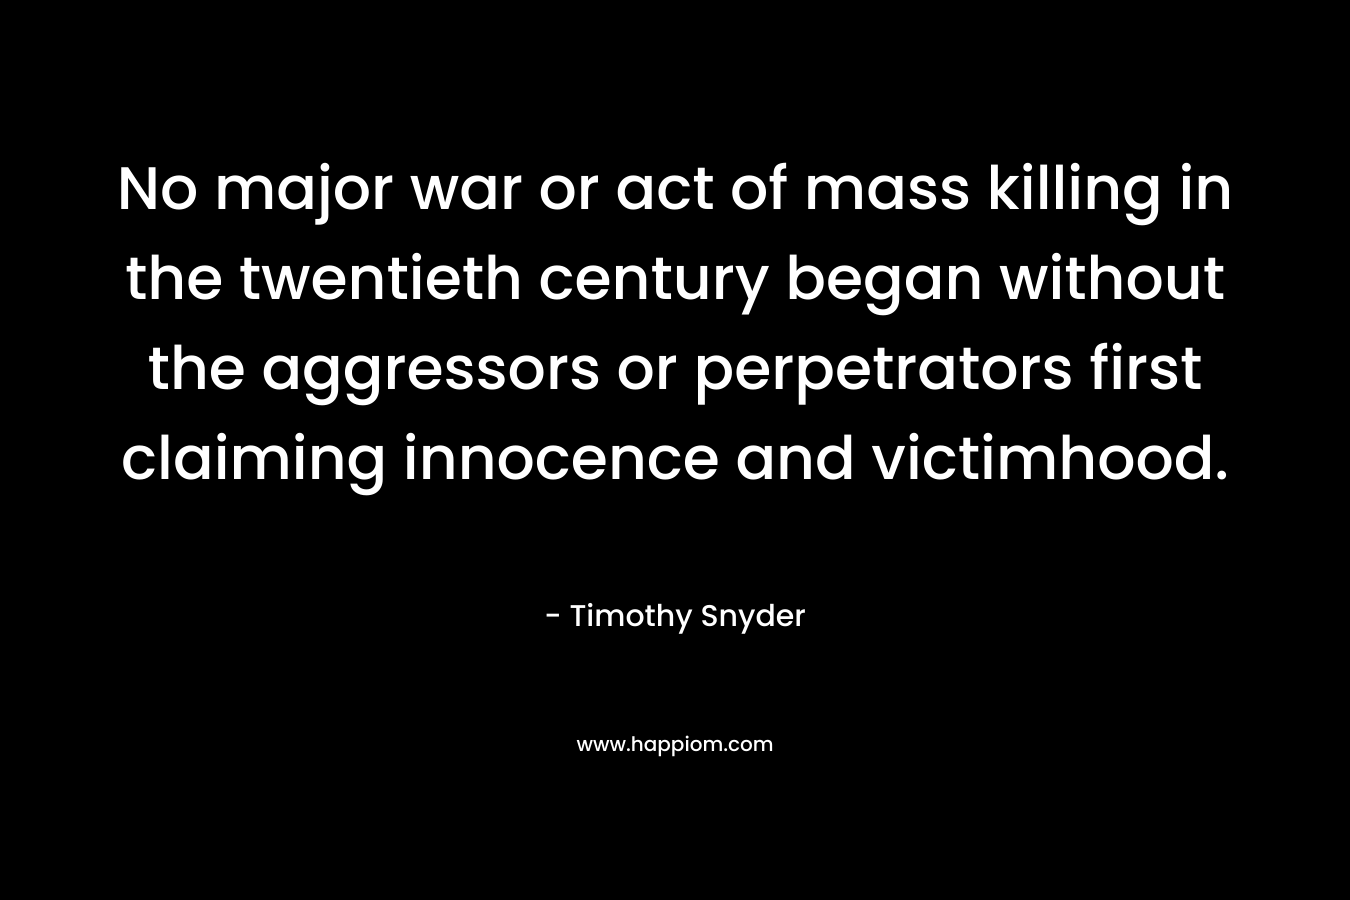 No major war or act of mass killing in the twentieth century began without the aggressors or perpetrators first claiming innocence and victimhood. – Timothy Snyder